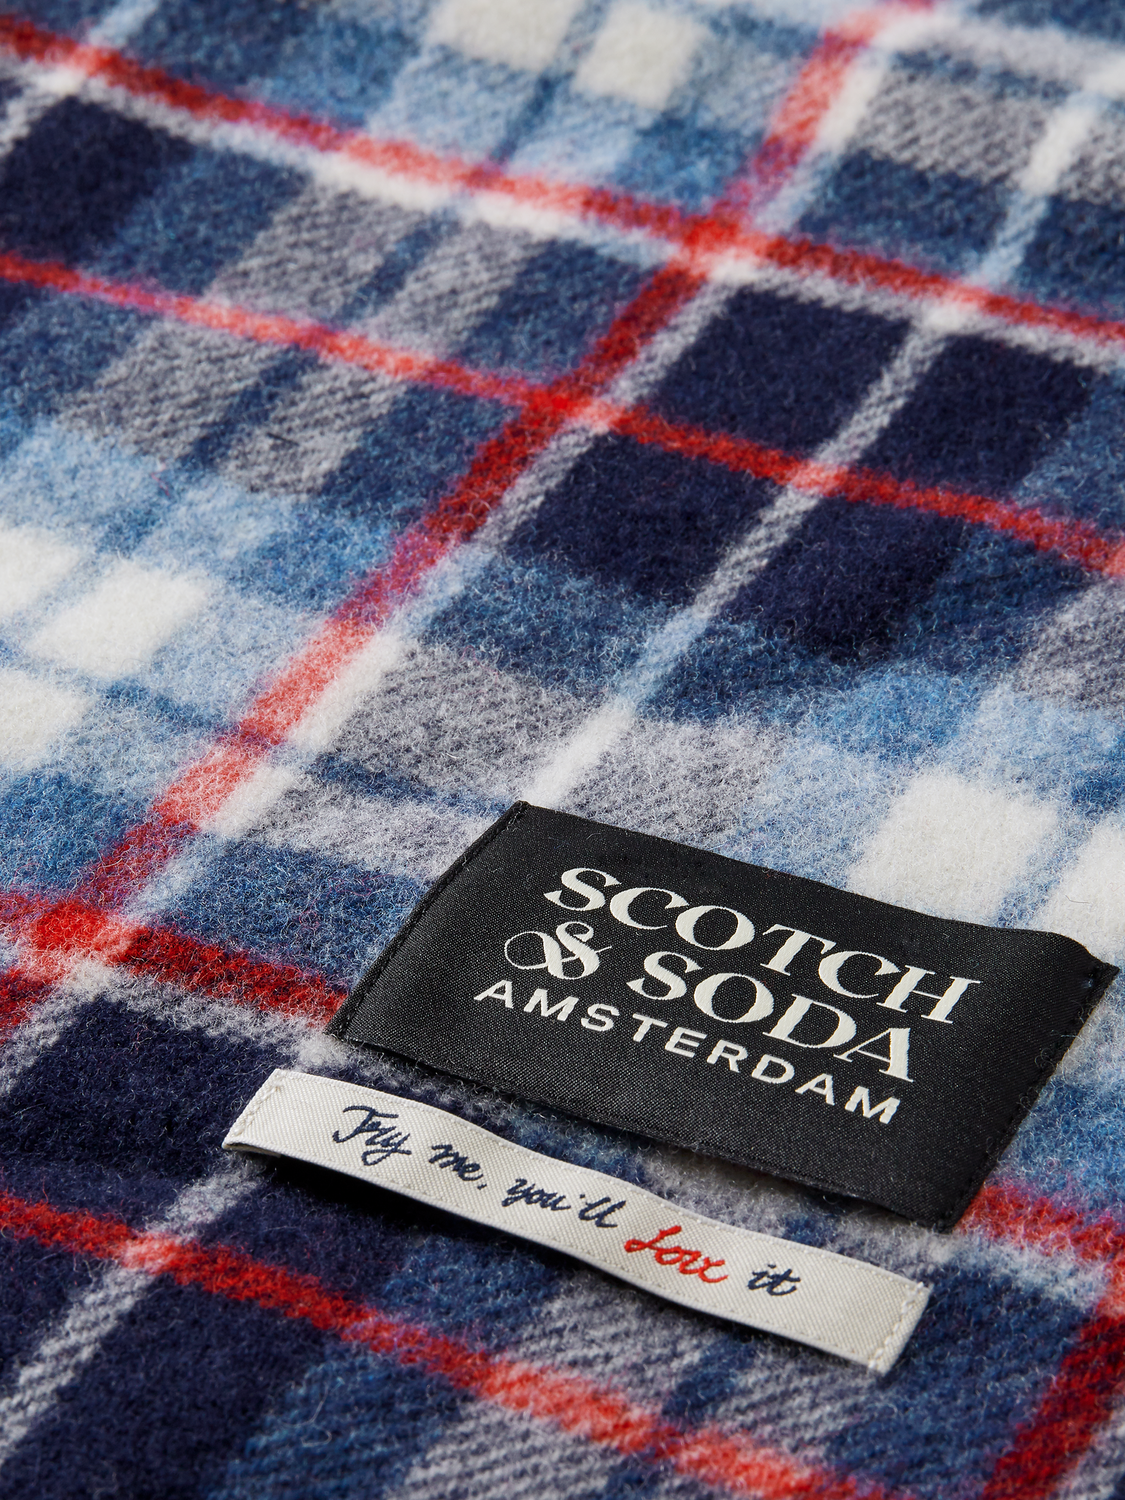 SCOTCH AND SODA Woven wool-blend check scarf